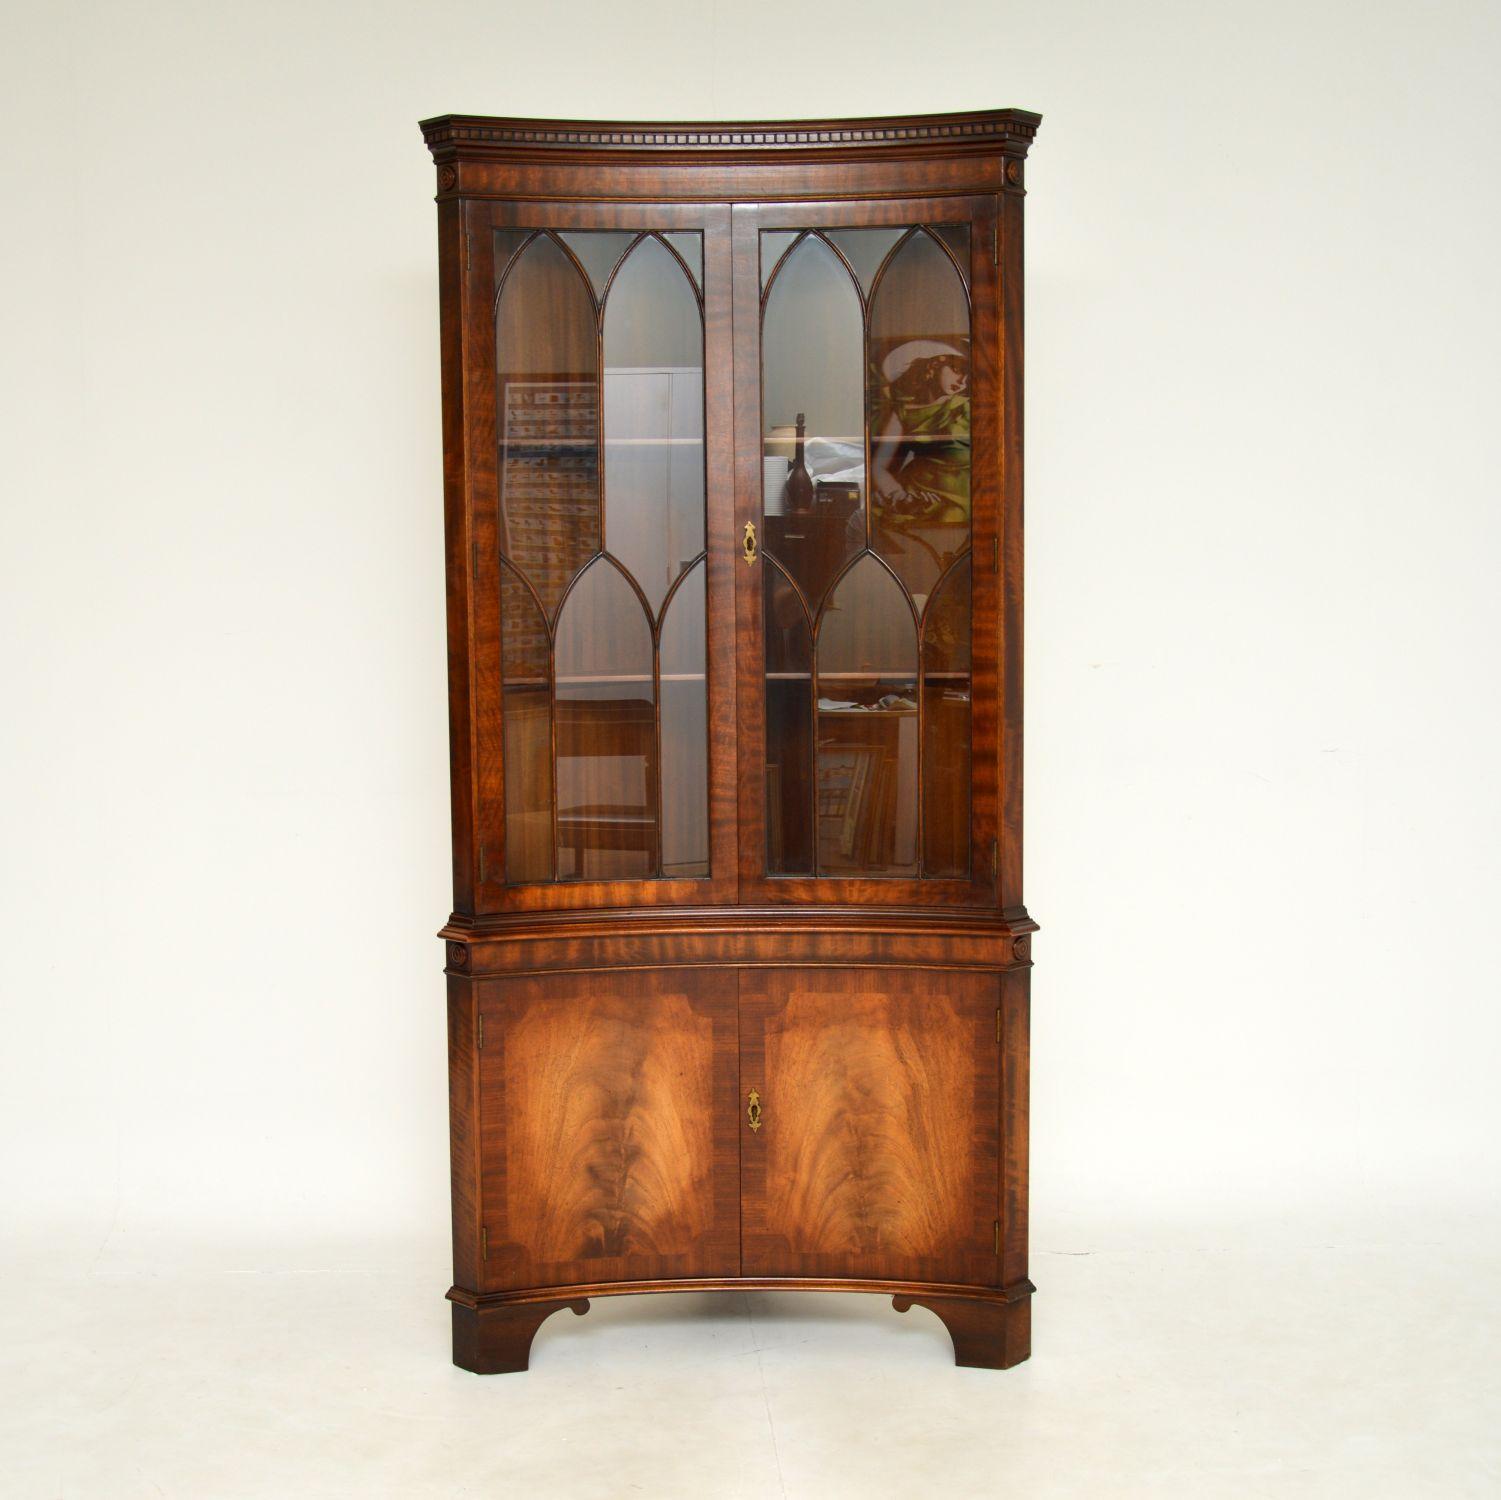 A very impressive antique Georgian style concave fronted corner cabinet. This was made in England & I would date it from around the 1930’s period.

The quality is excellent, this is a great size and is a very useful design. The upper doors are